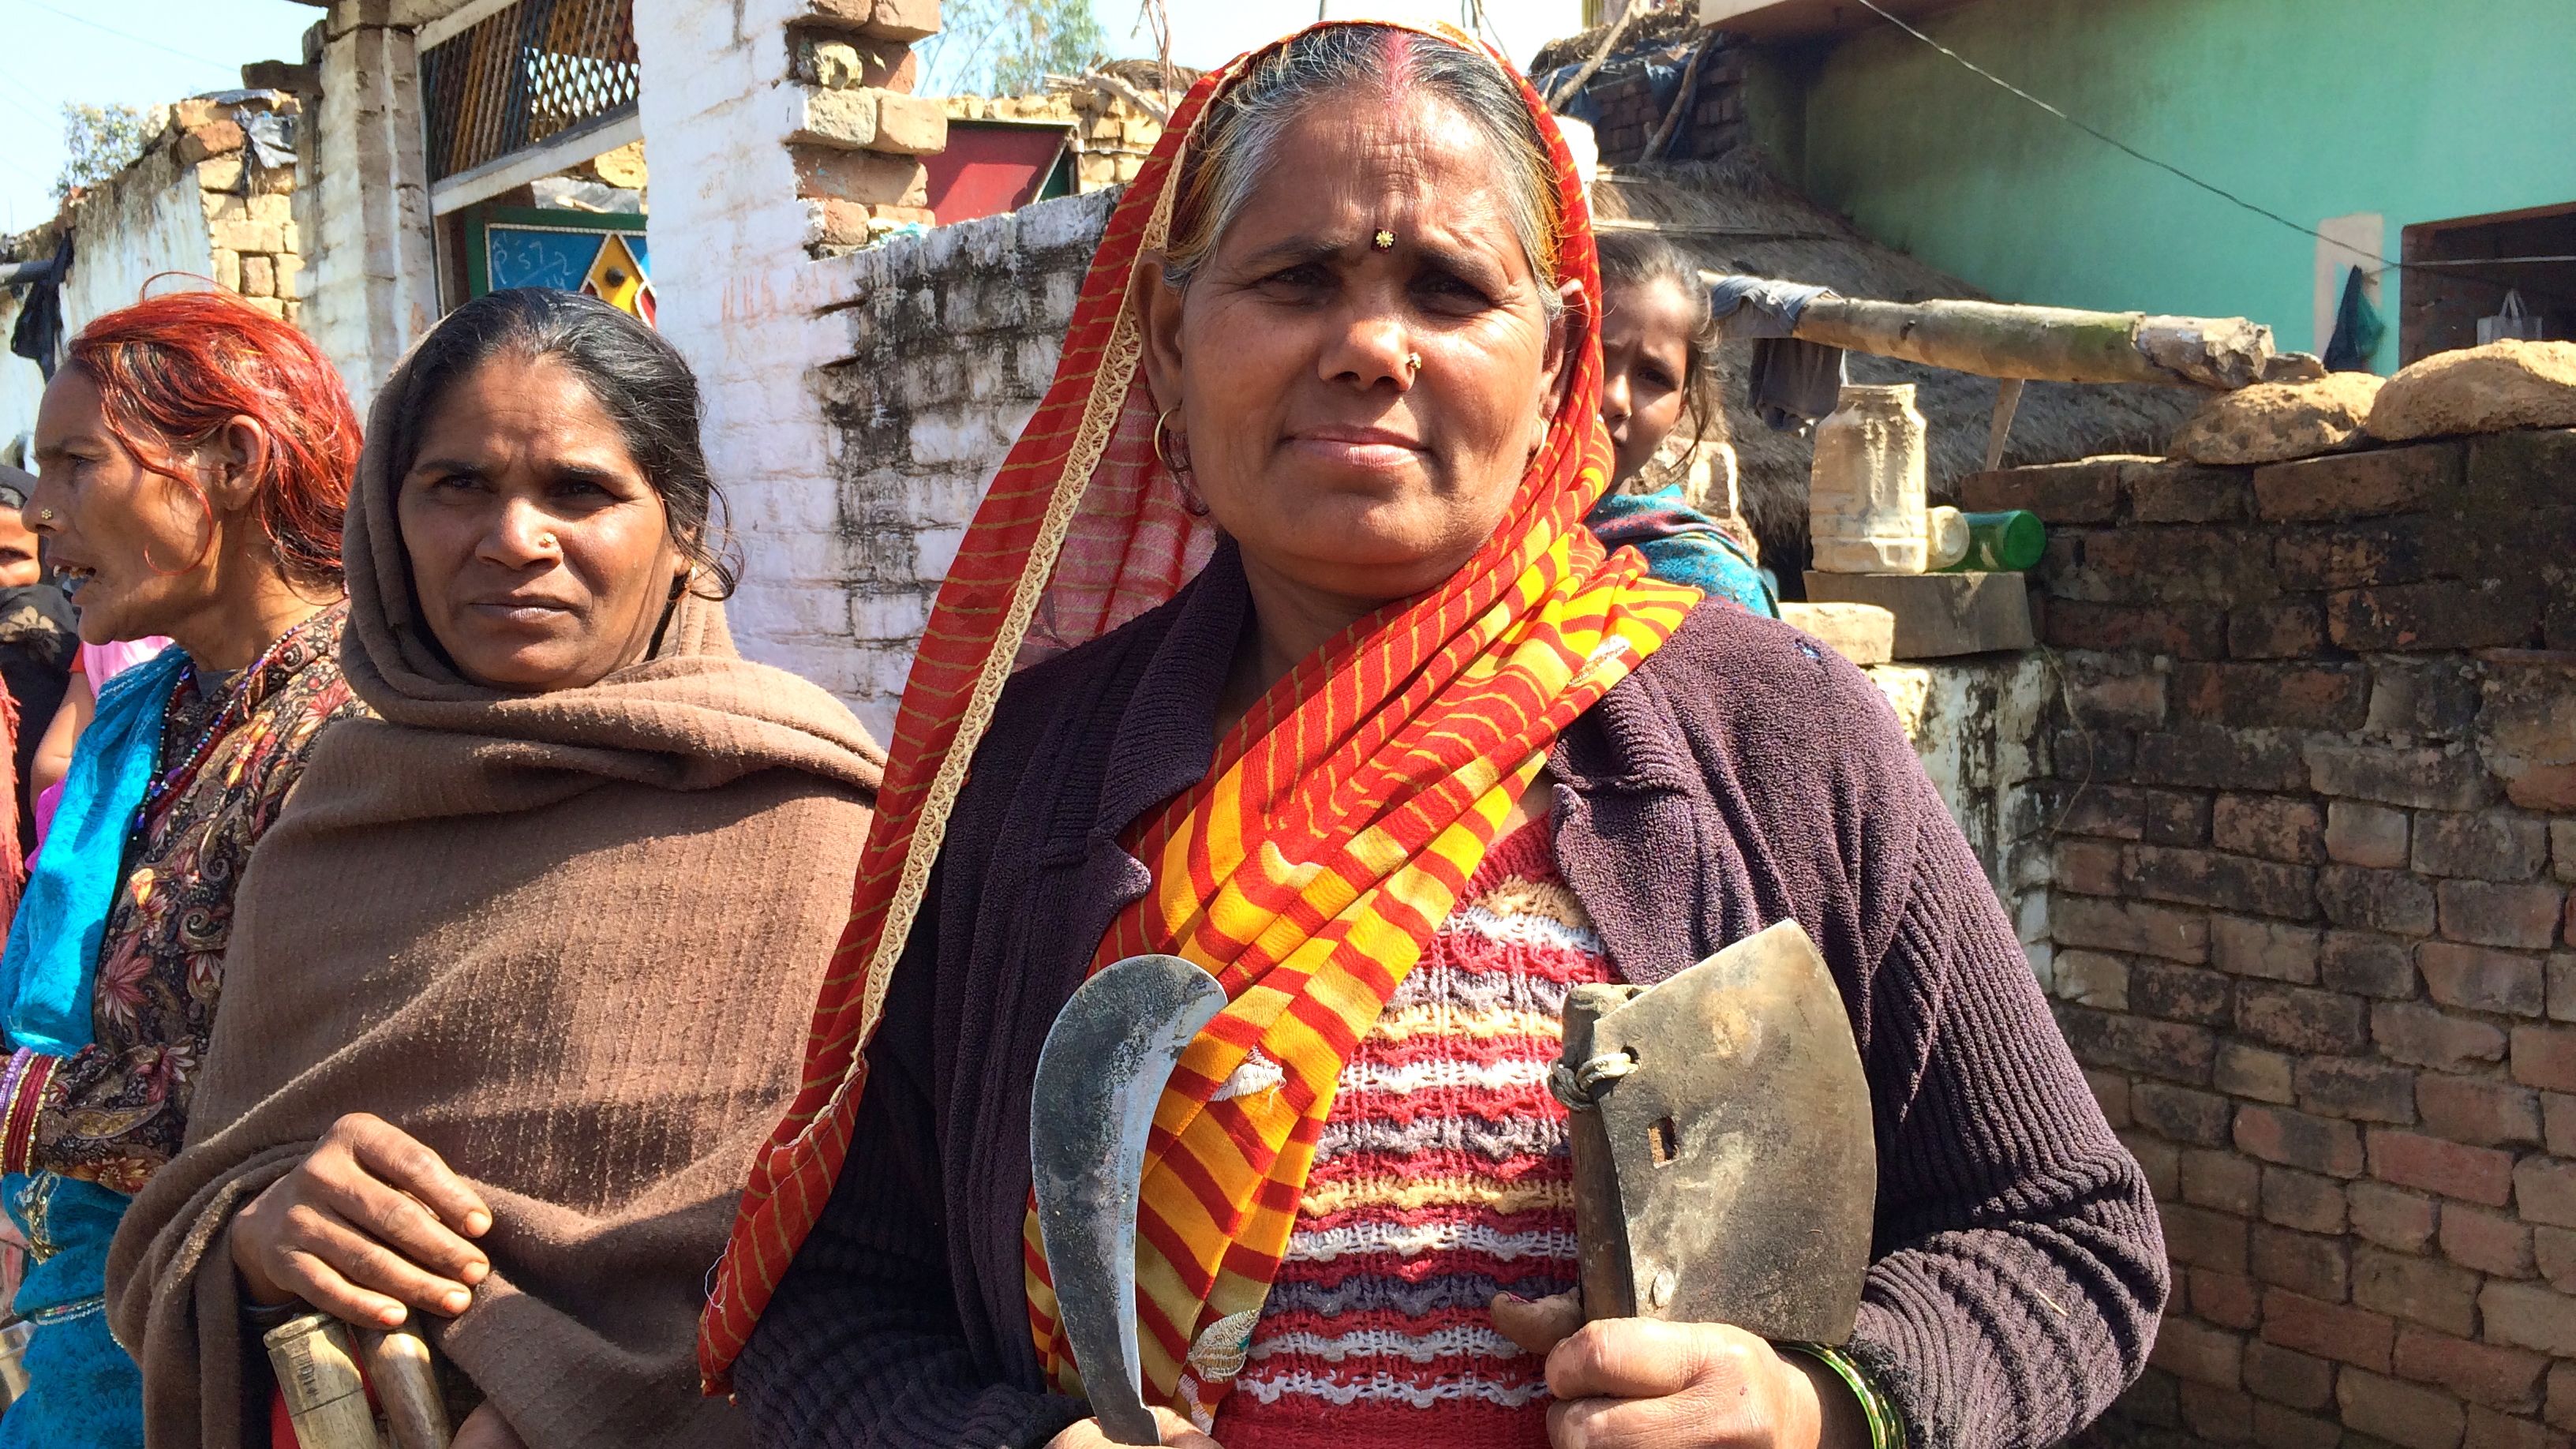 Mithilesh says women in her village are scared to work in the fields since the attacks. Many go out in groups of 15 or 20.